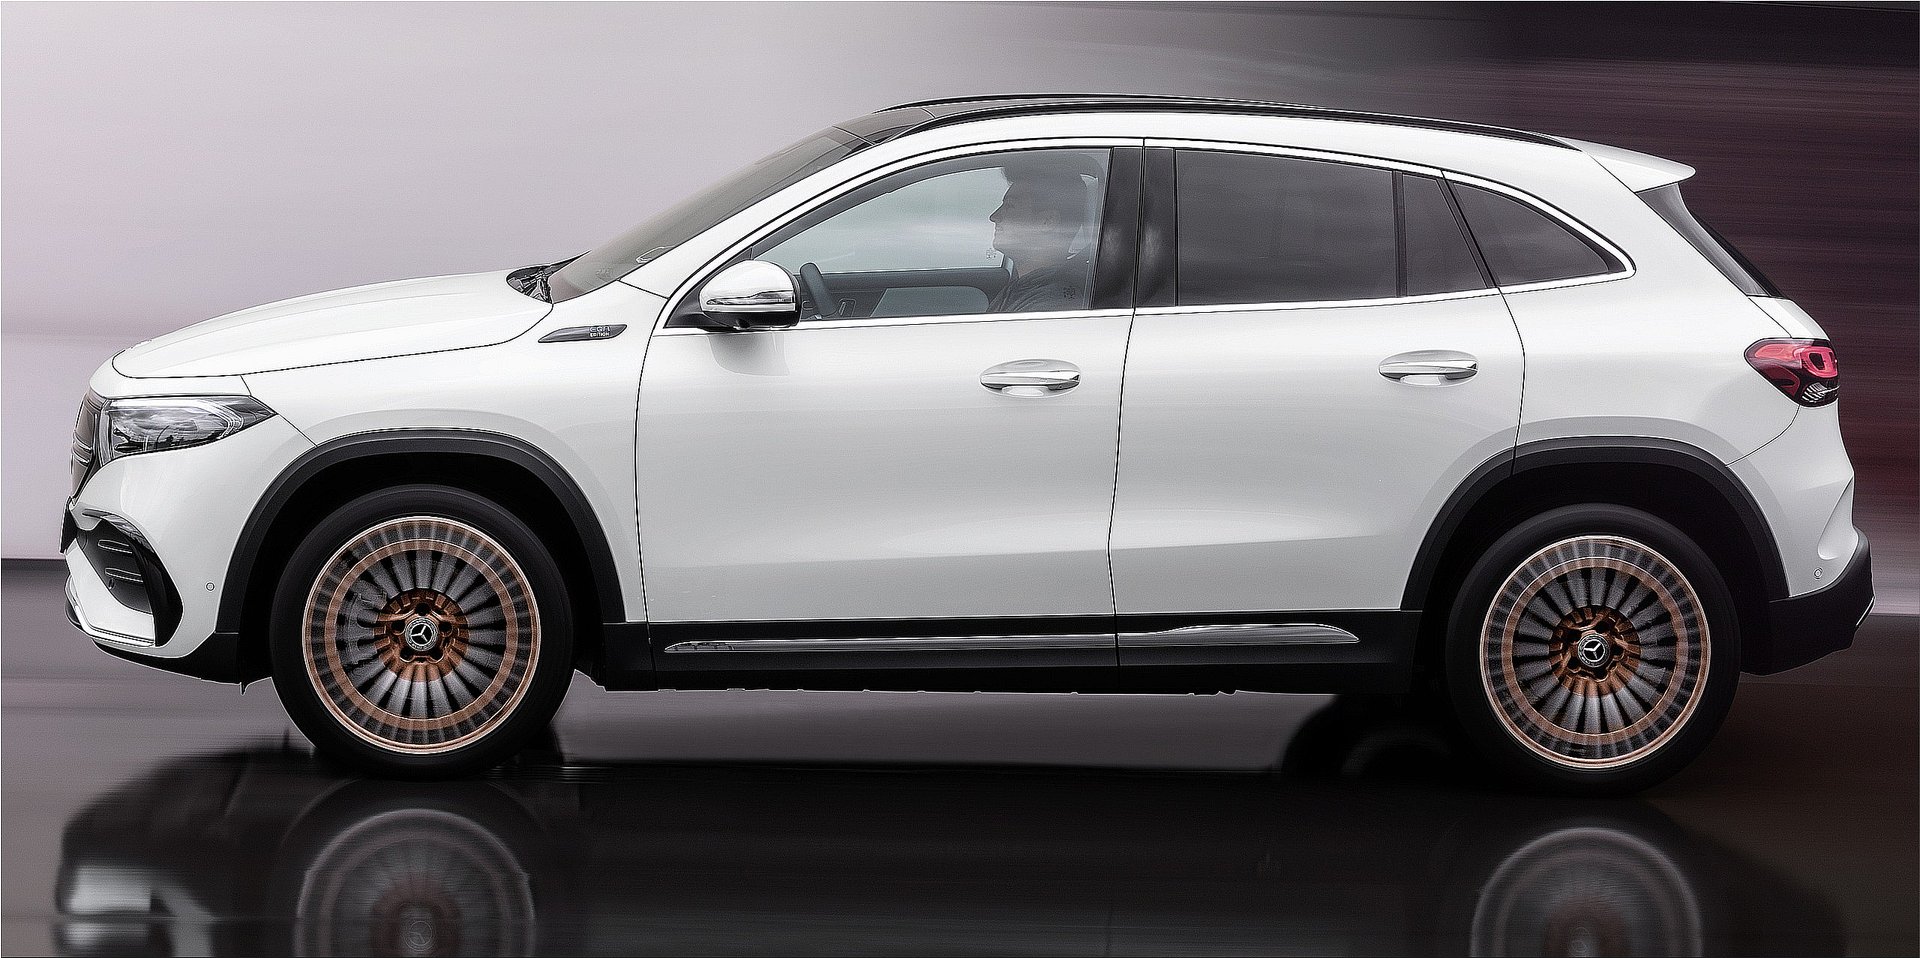 The new Mercedes-Benz EQA 250 compact SUV